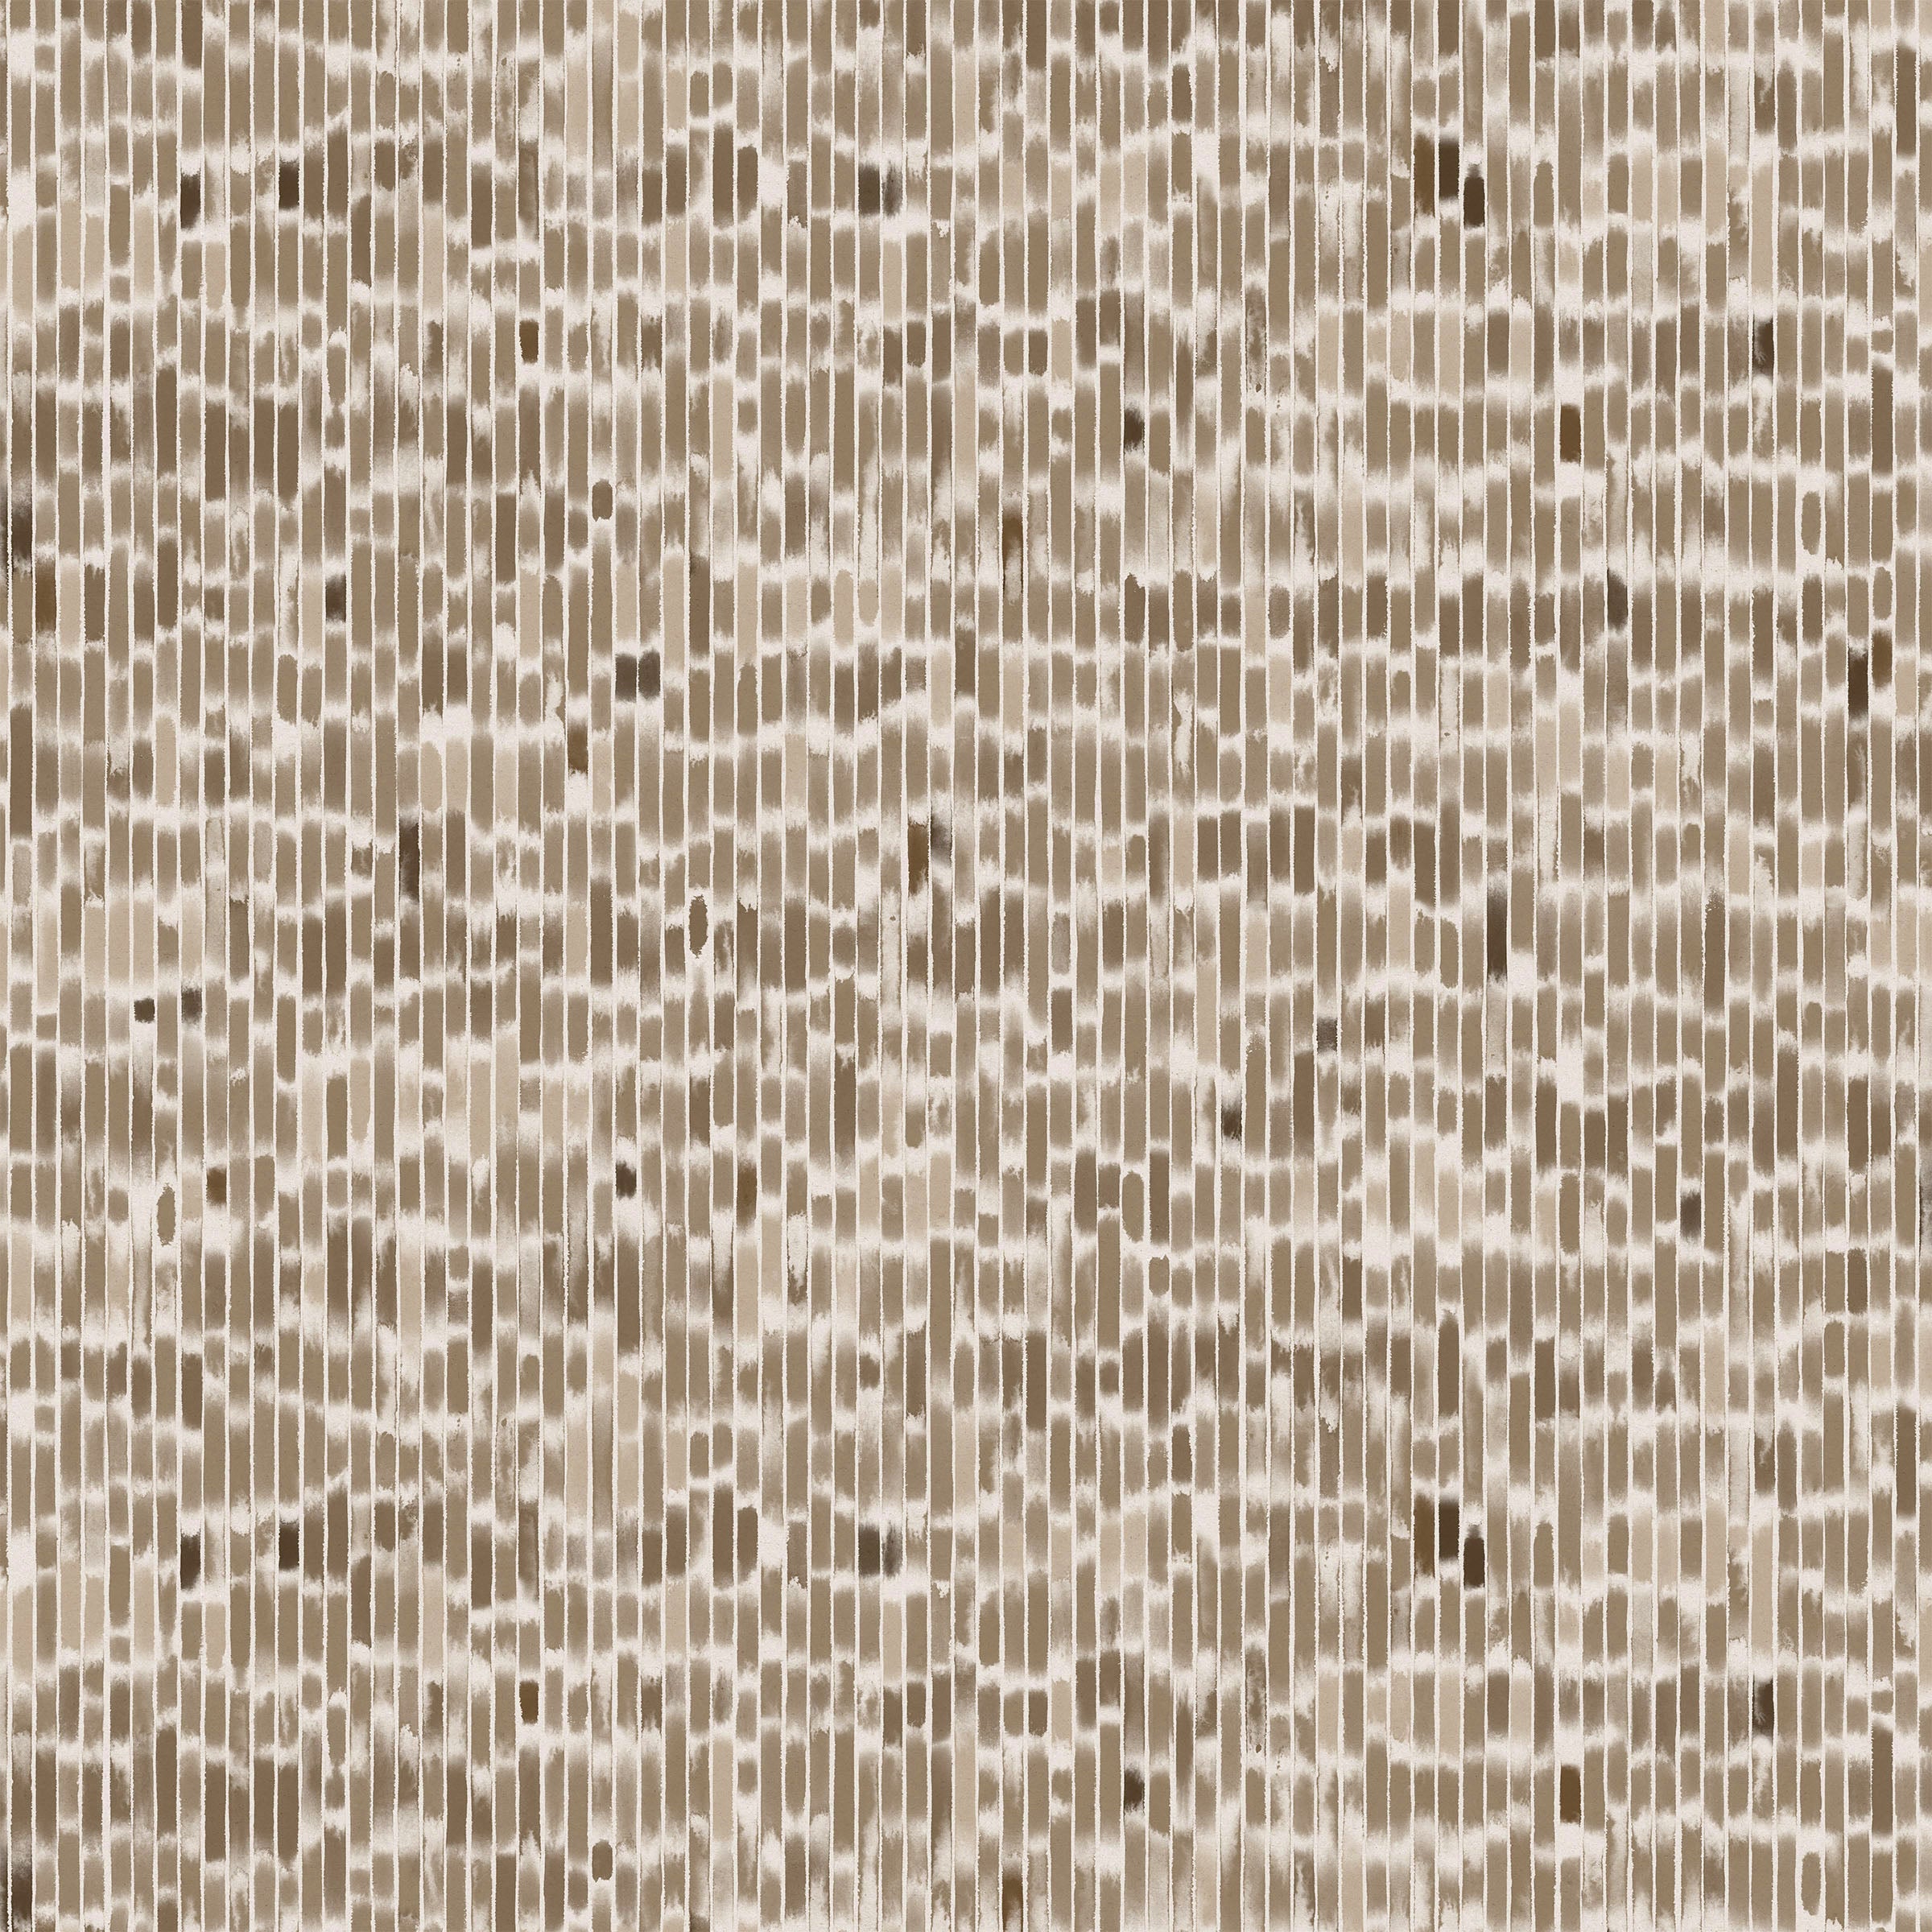 Detail of fabric in a linear check pattern in shades of brown on a white field.